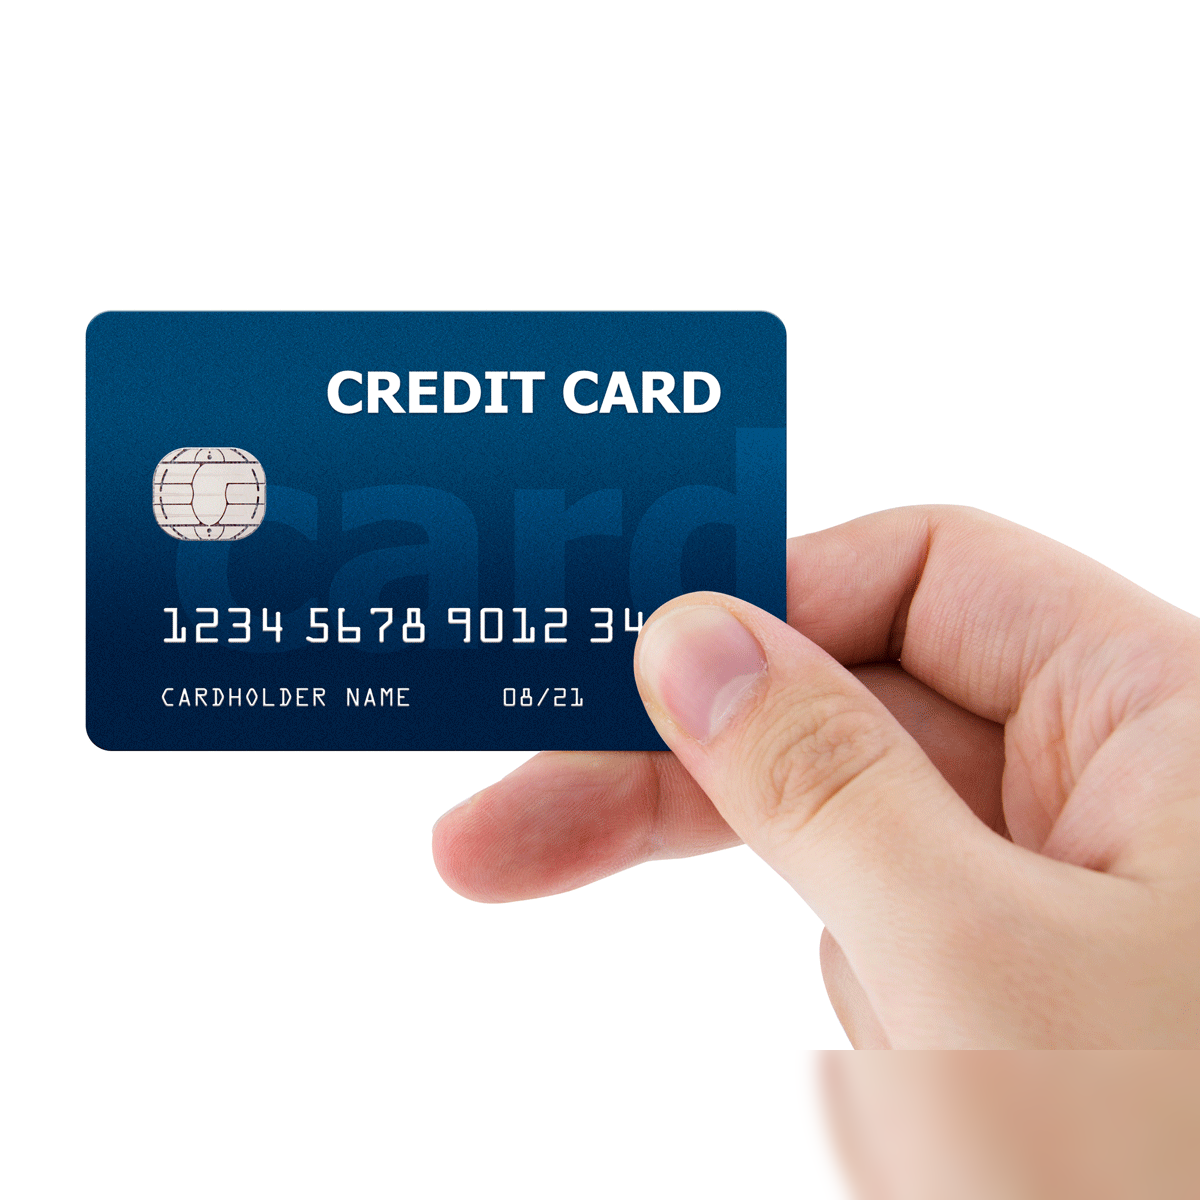 Credit card for unemployed: How to get a credit card if you don't